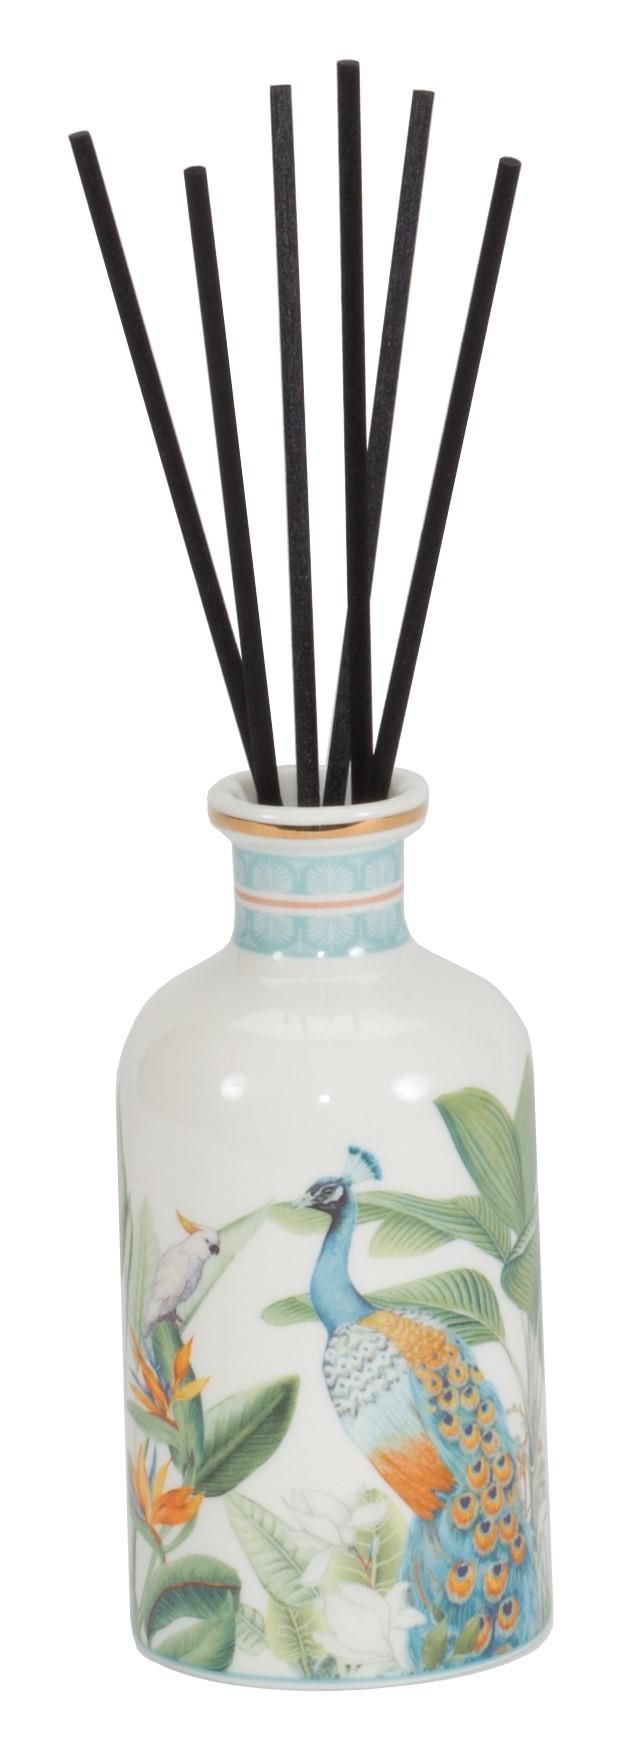 Special Offer -Tropical Collection Diffuser with free matching notepad